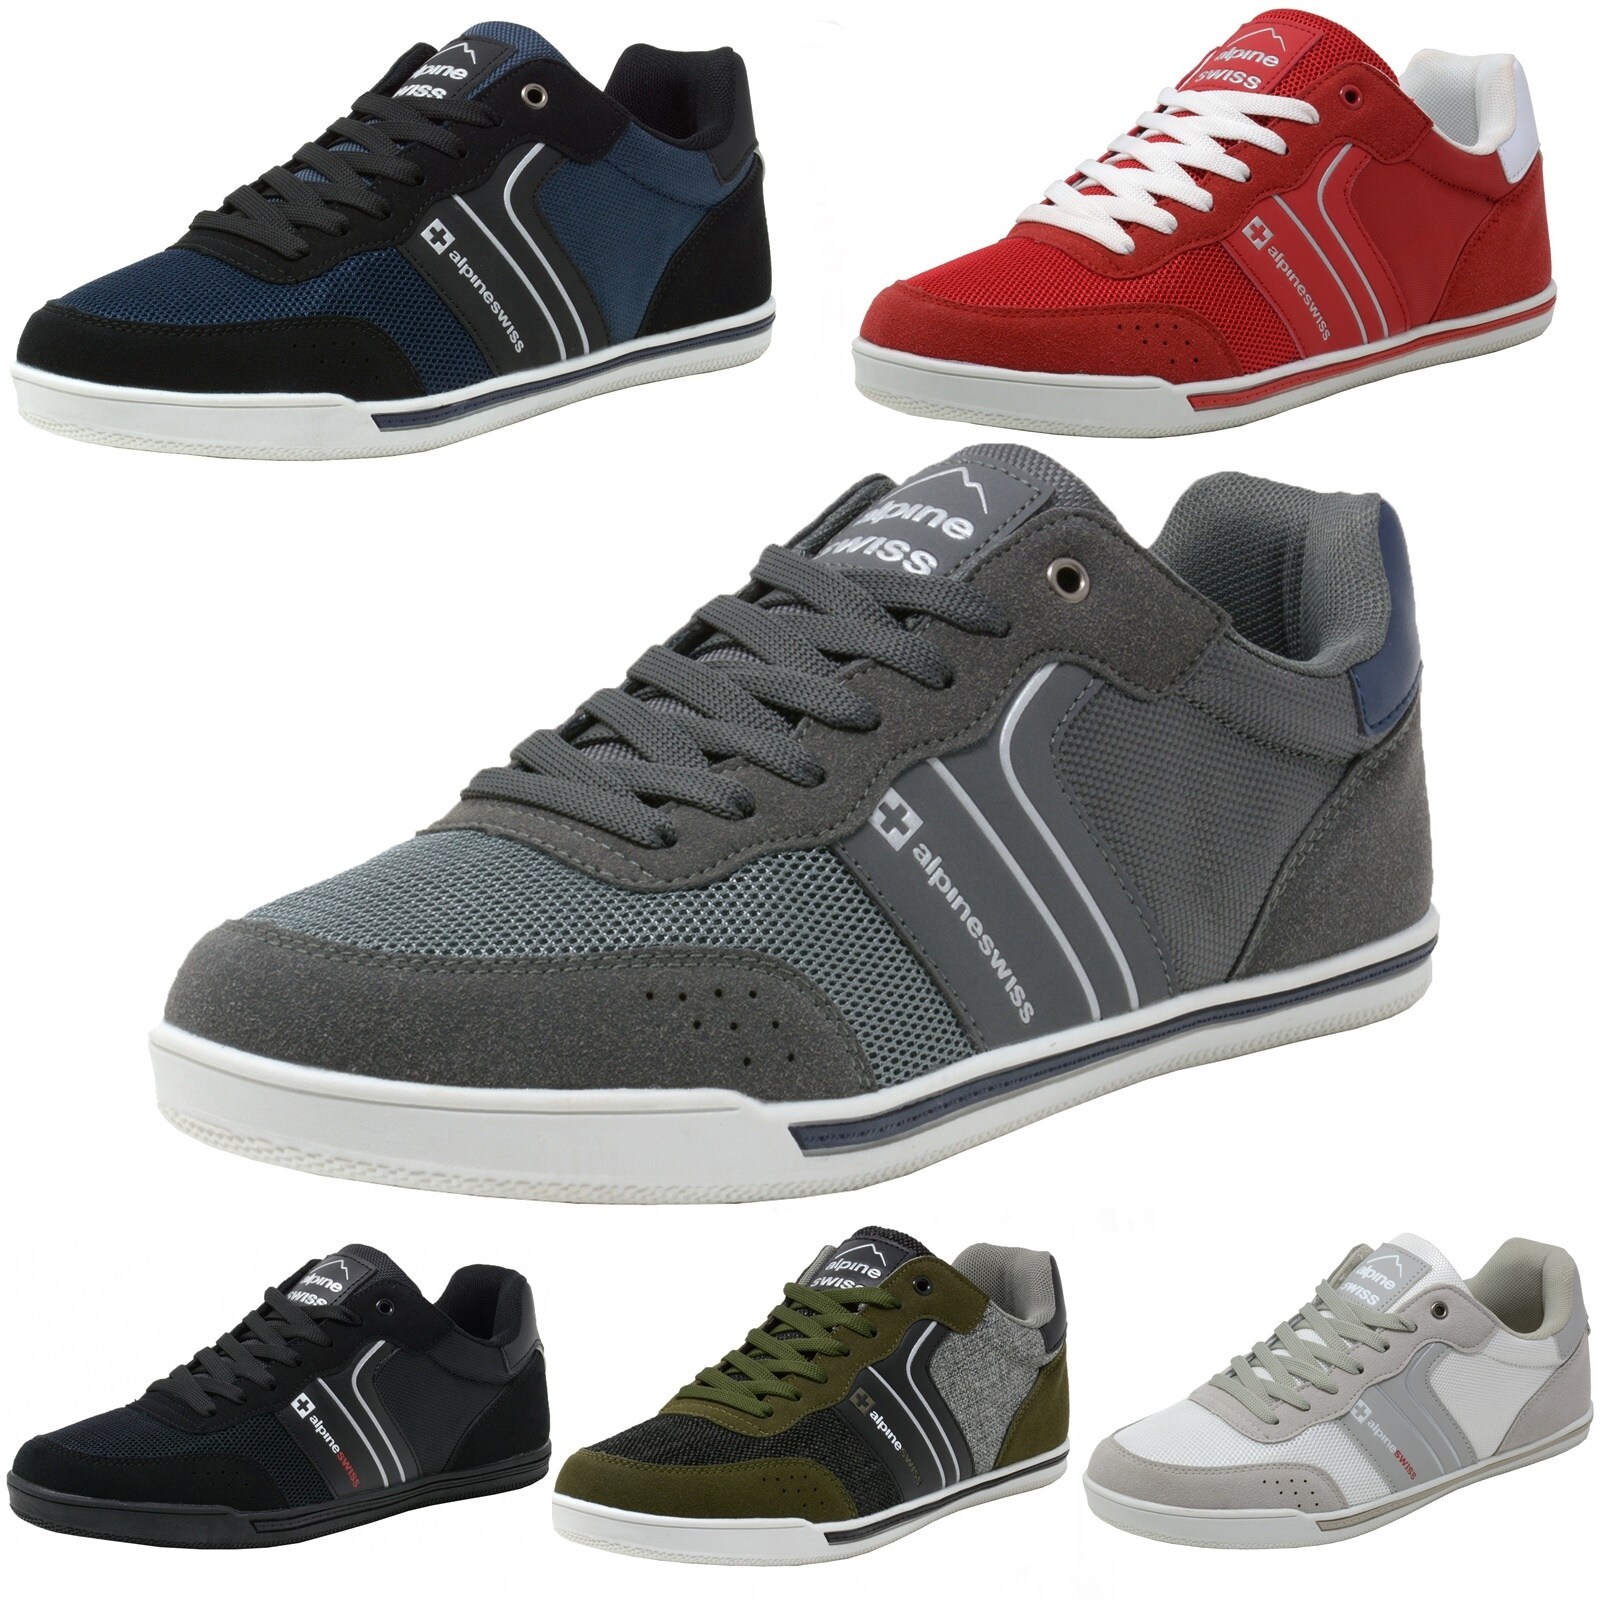 Alpine Swiss Liam Mens Fashion Sneakers Suede Trim Low Top Lace Up Tennis Shoes 